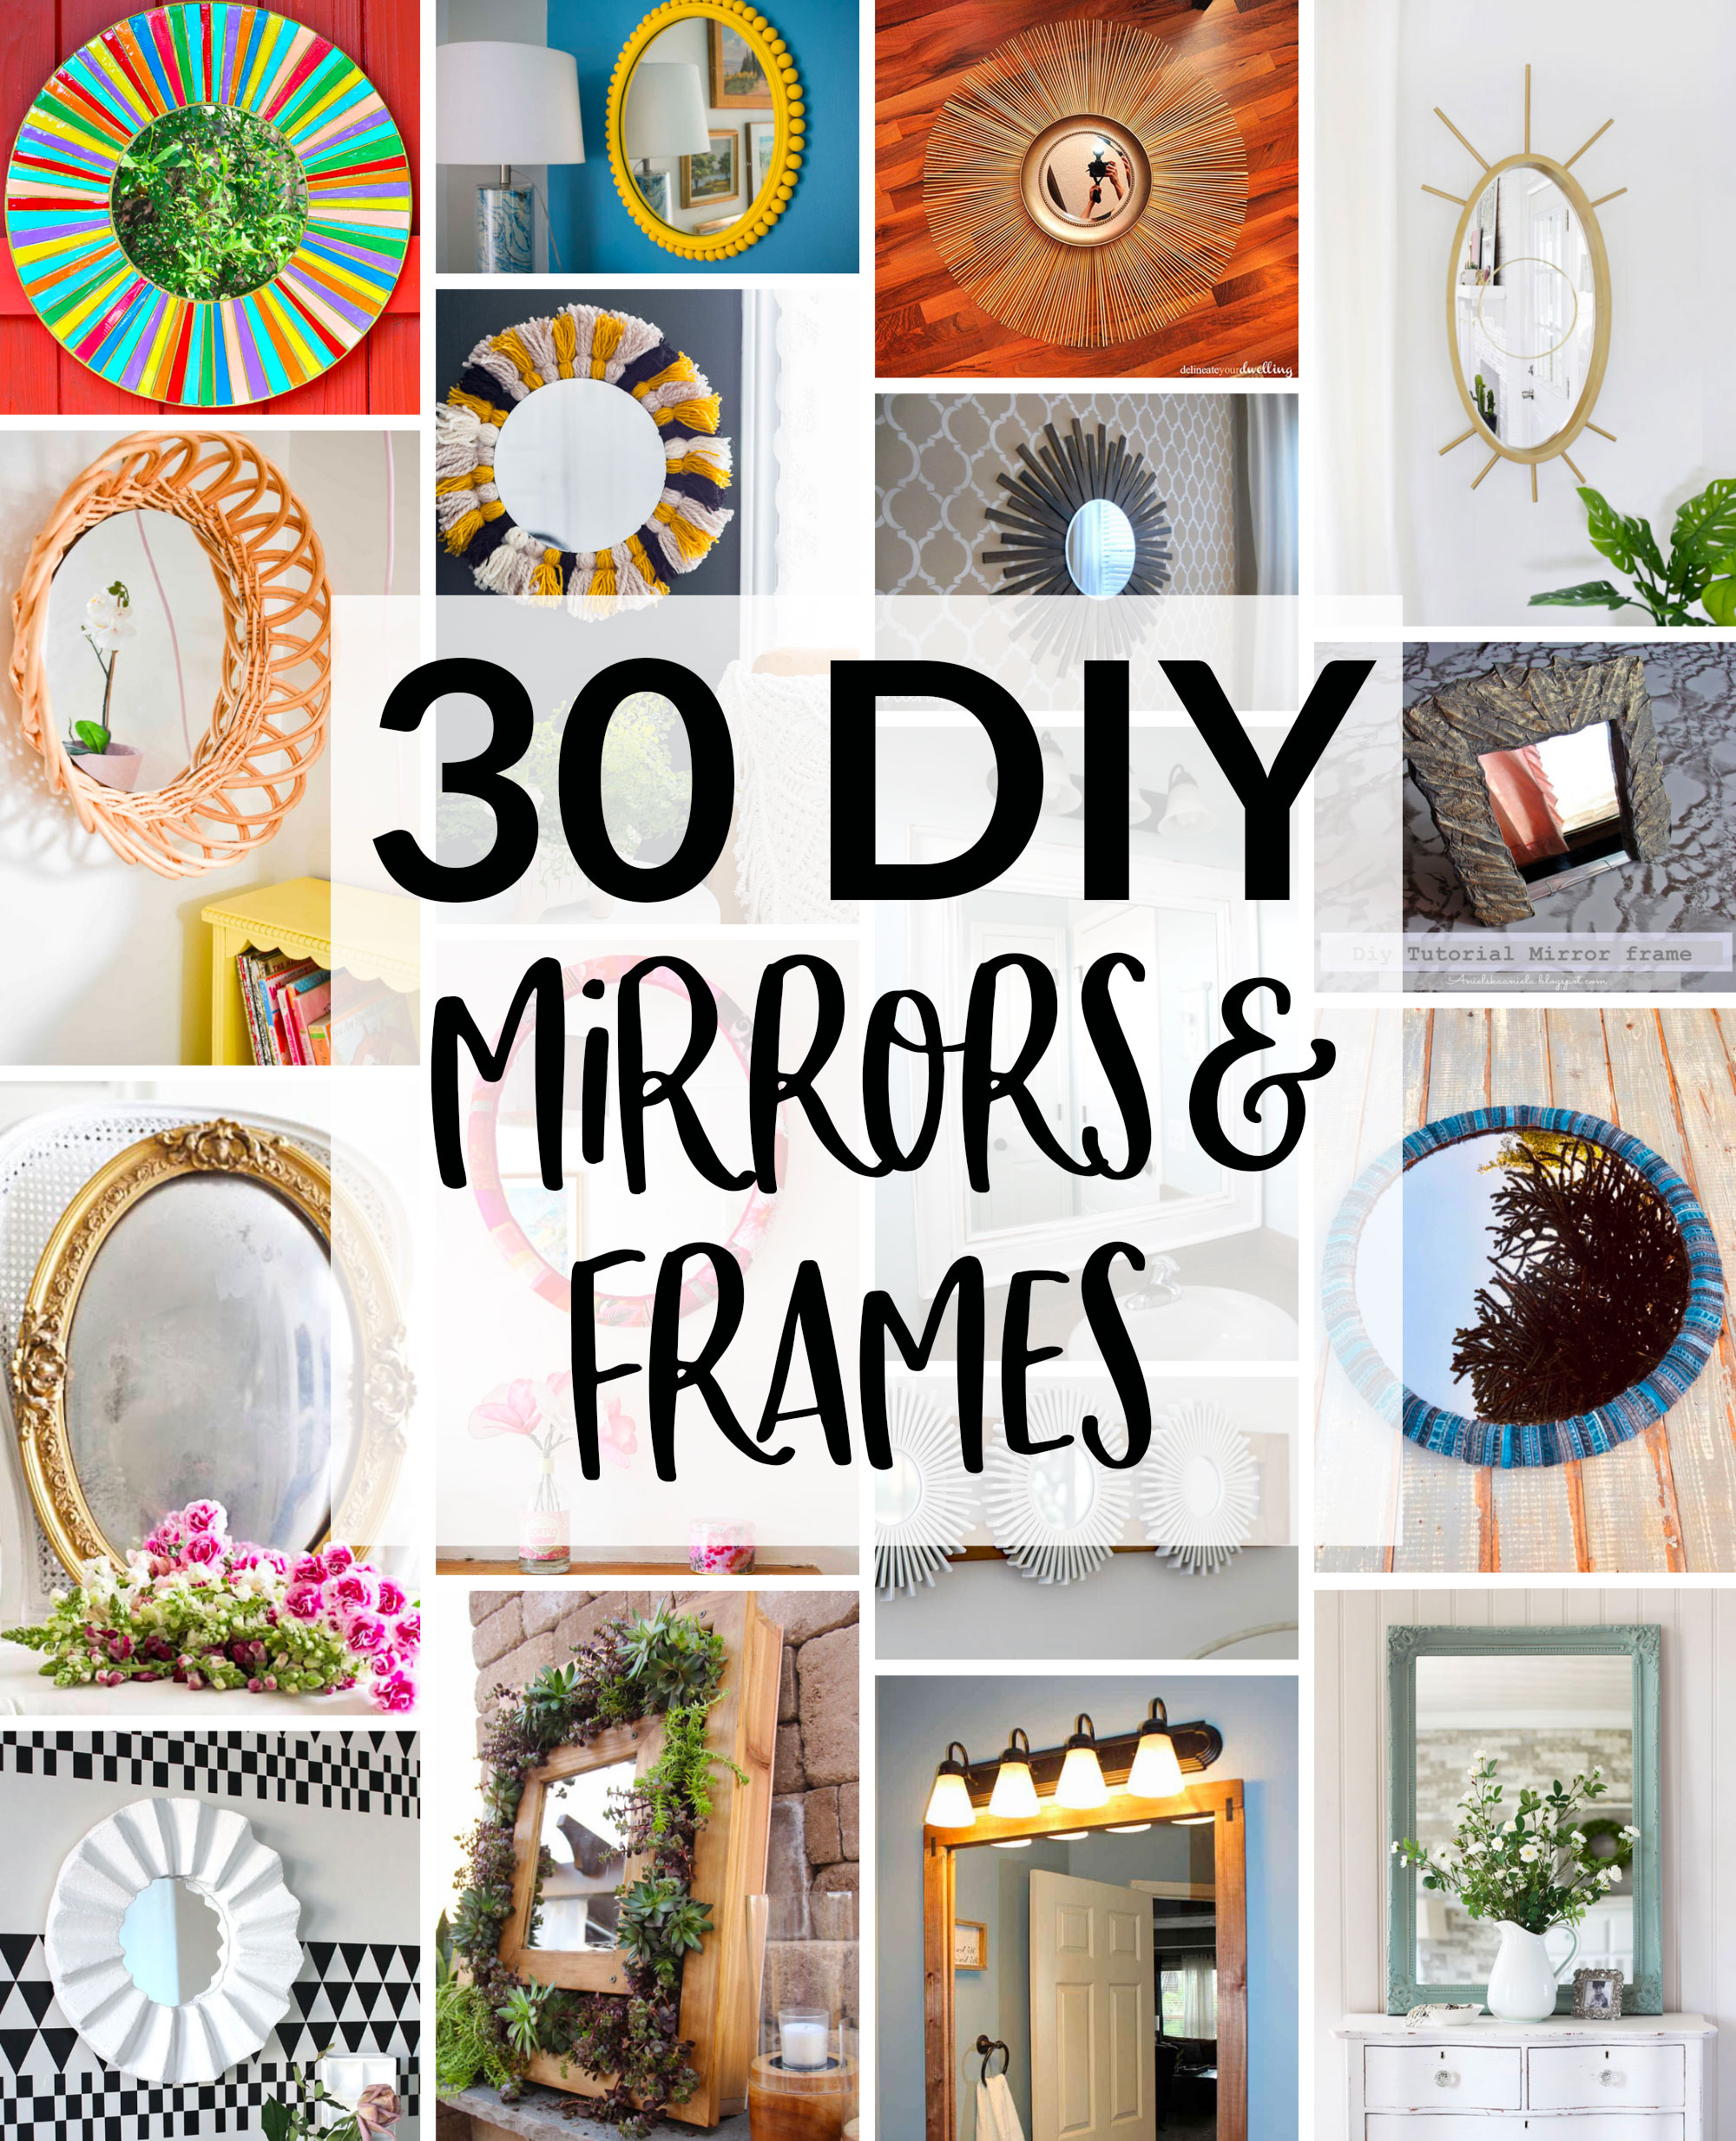 30 Diy Mirror Frames Scratch And Stitch, How To Add A Frame An Existing Mirror